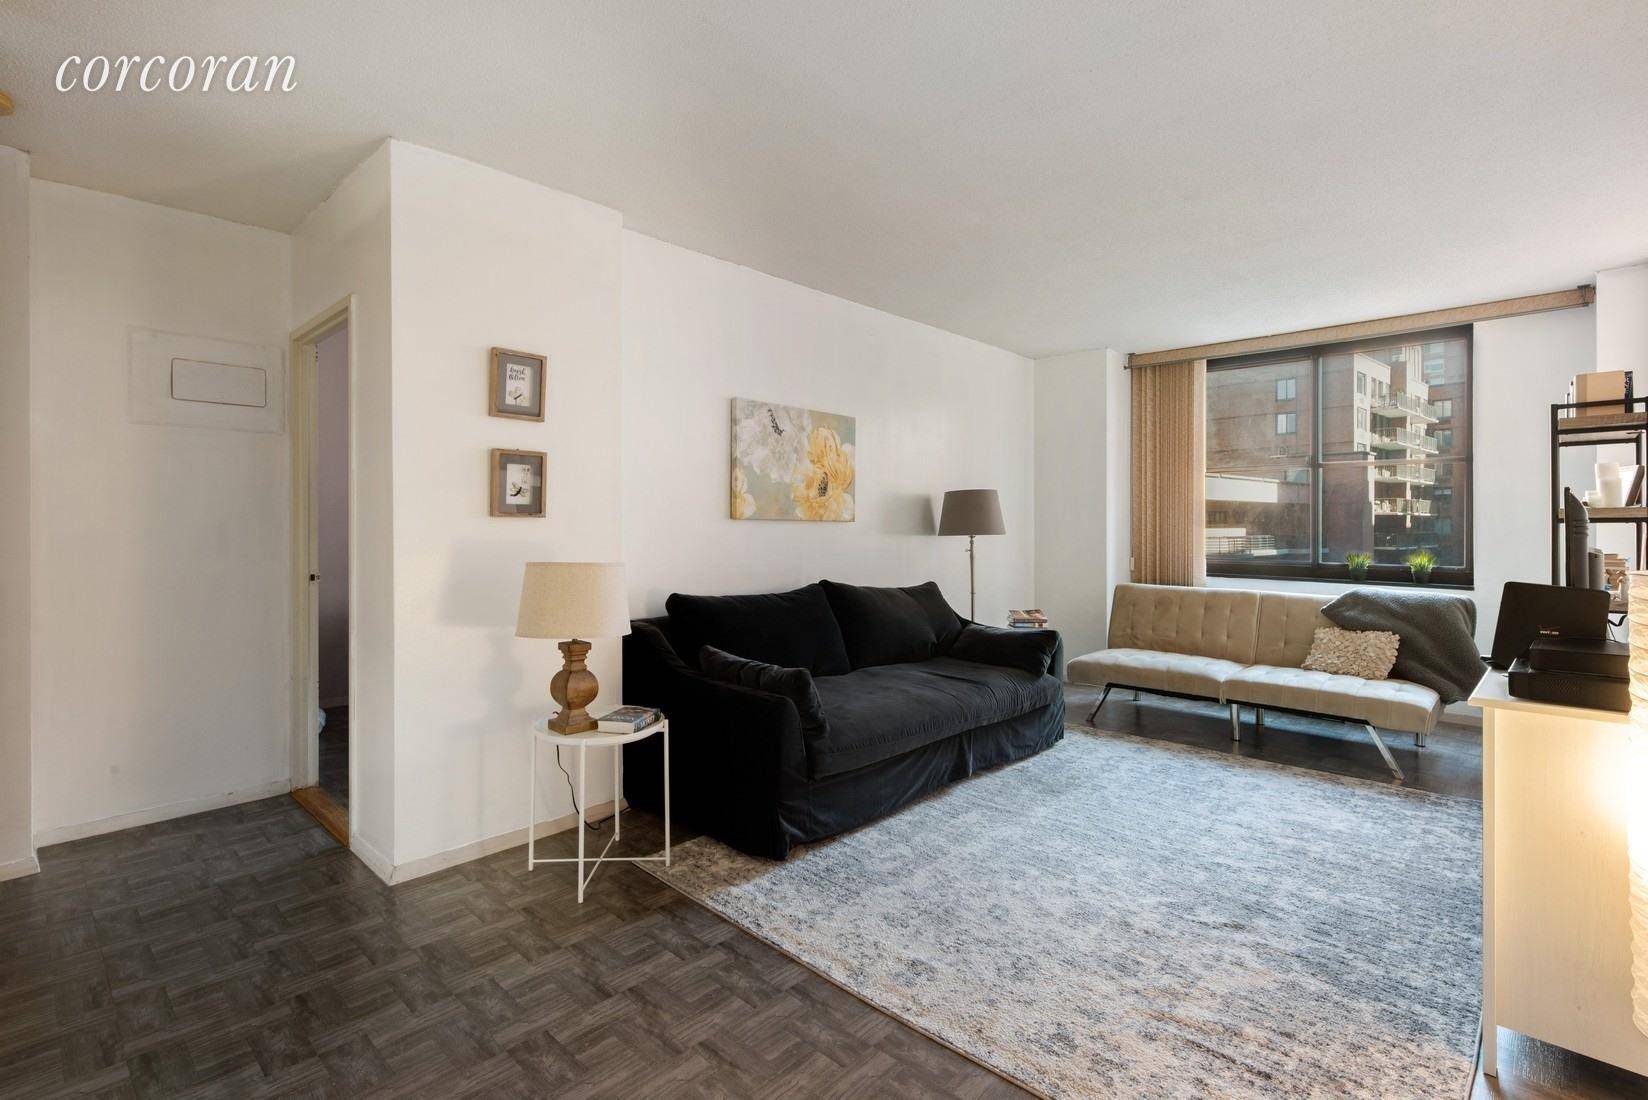 Welcome home to this East facing one bedroom condo in an excellent Battery Park City location on the water.